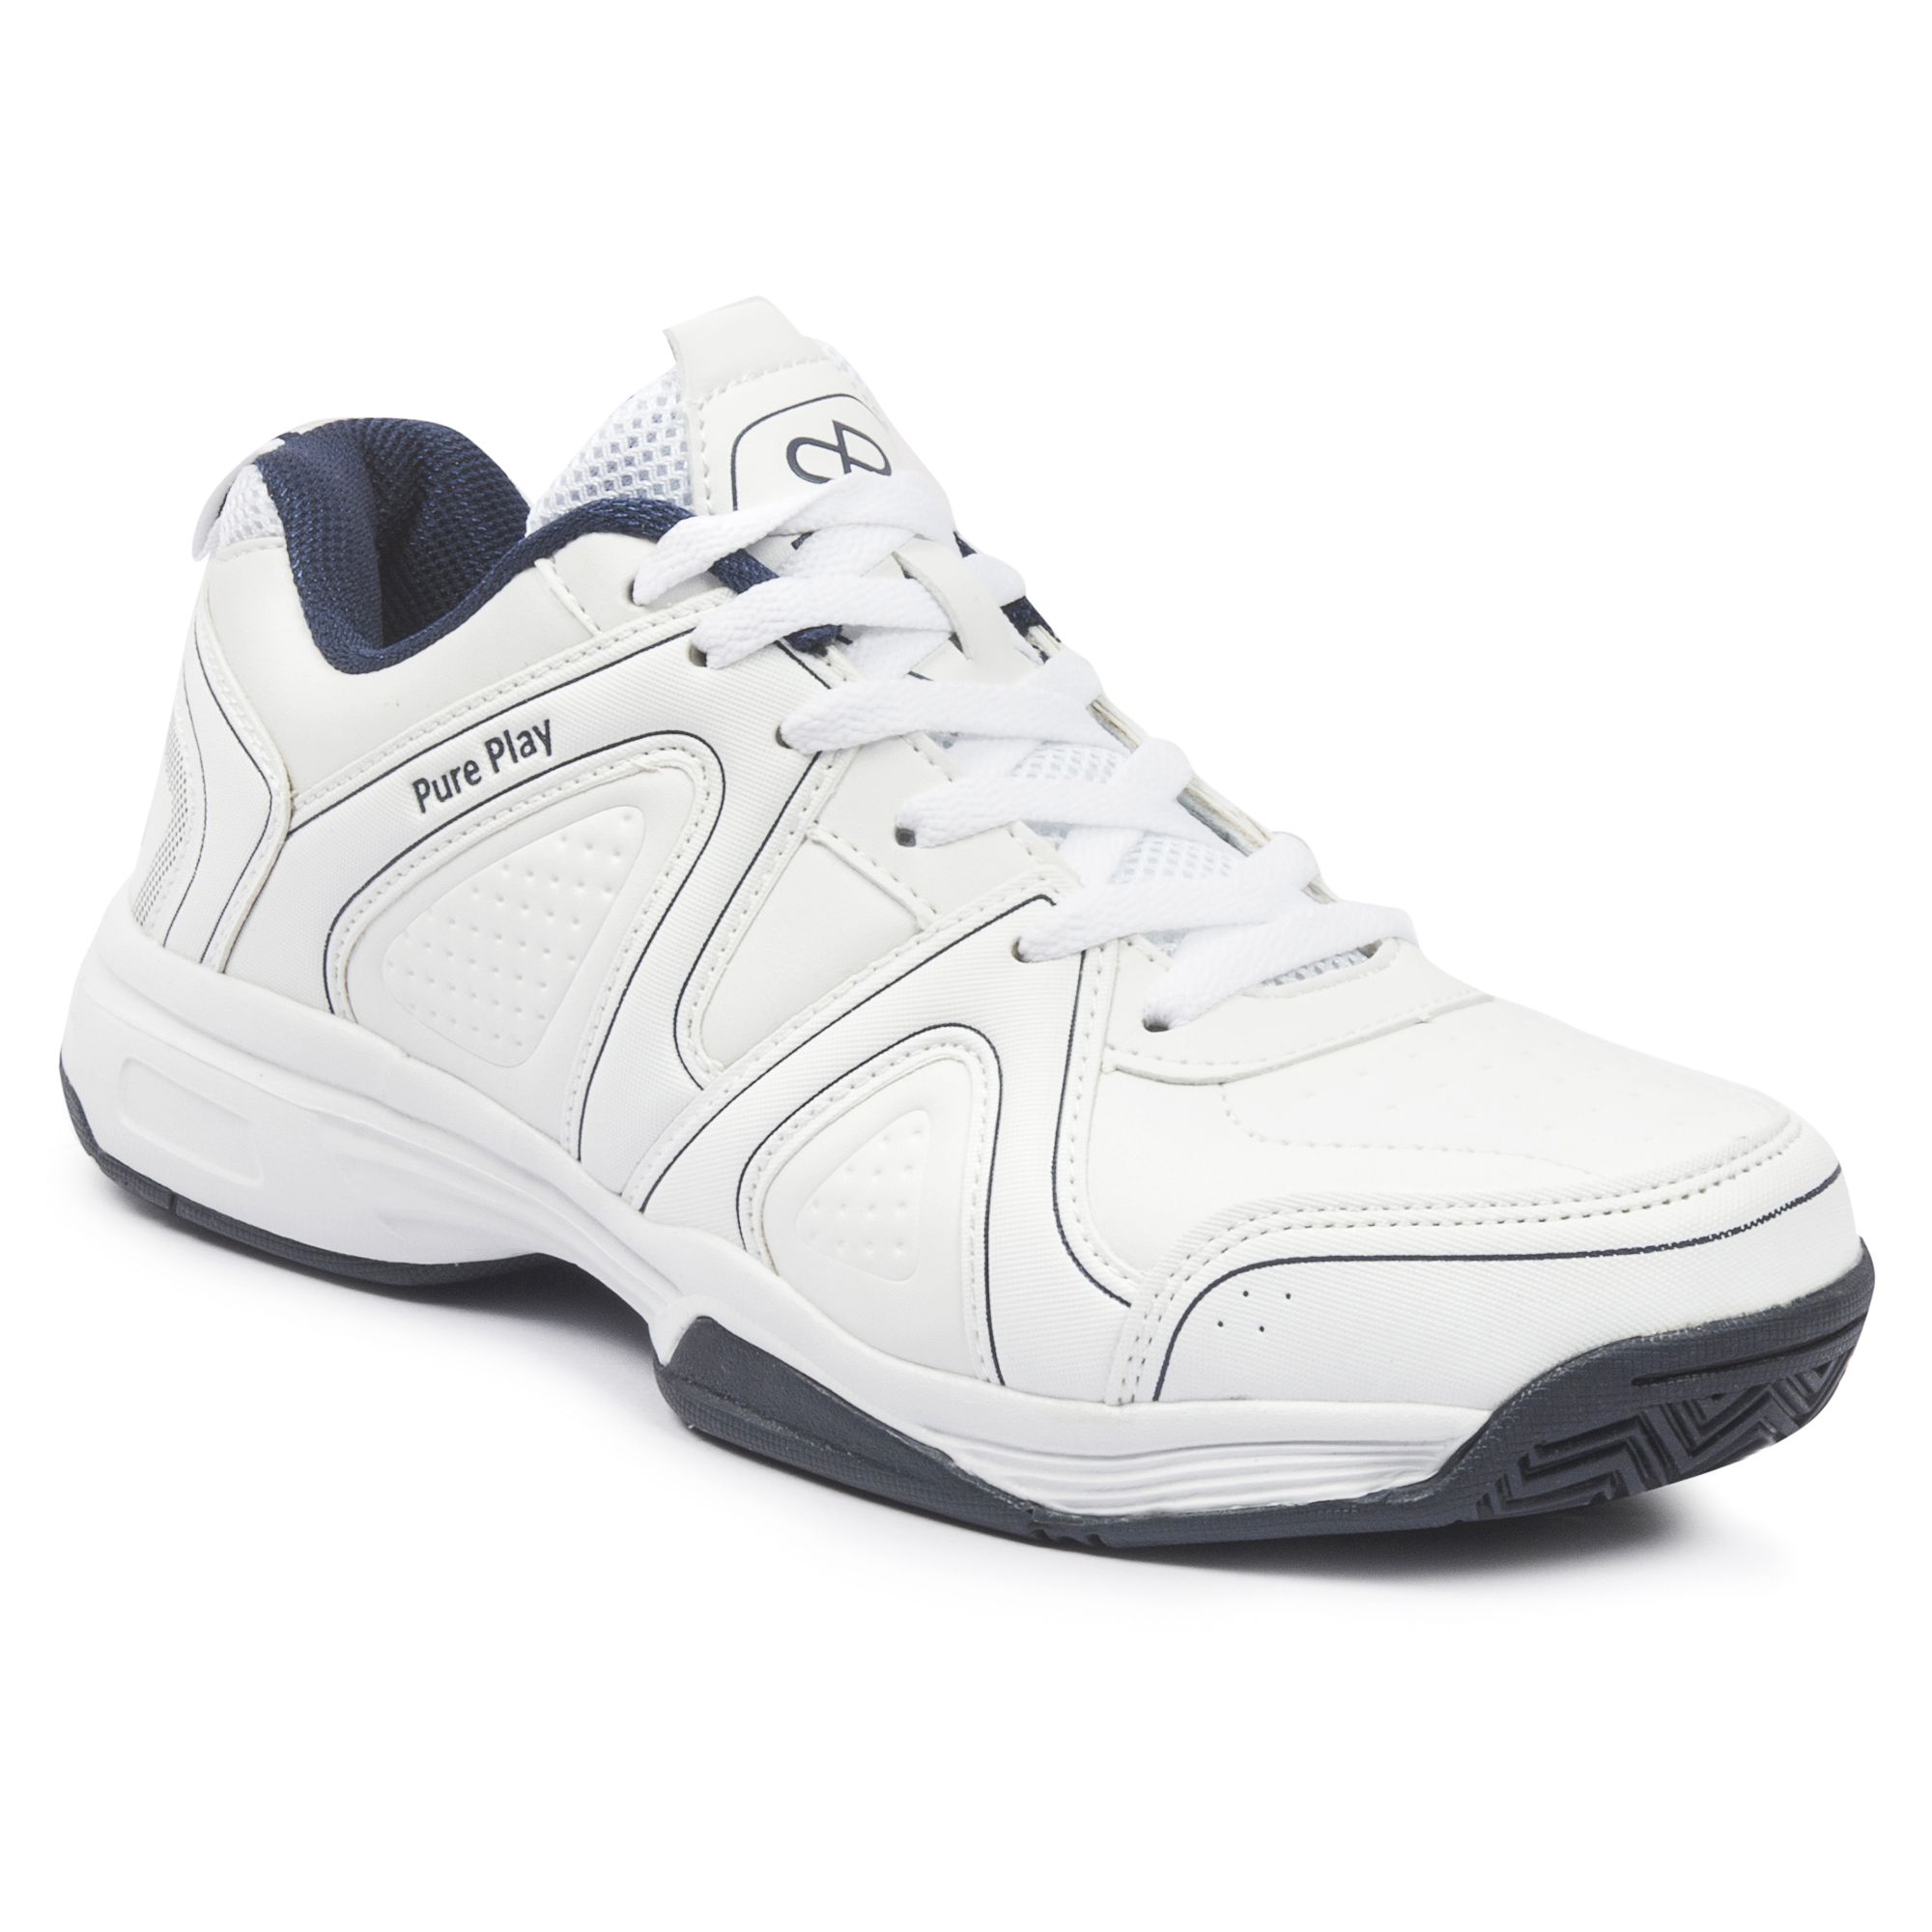 Pure Play White Running Shoes - Buy Pure Play White Running Shoes ...